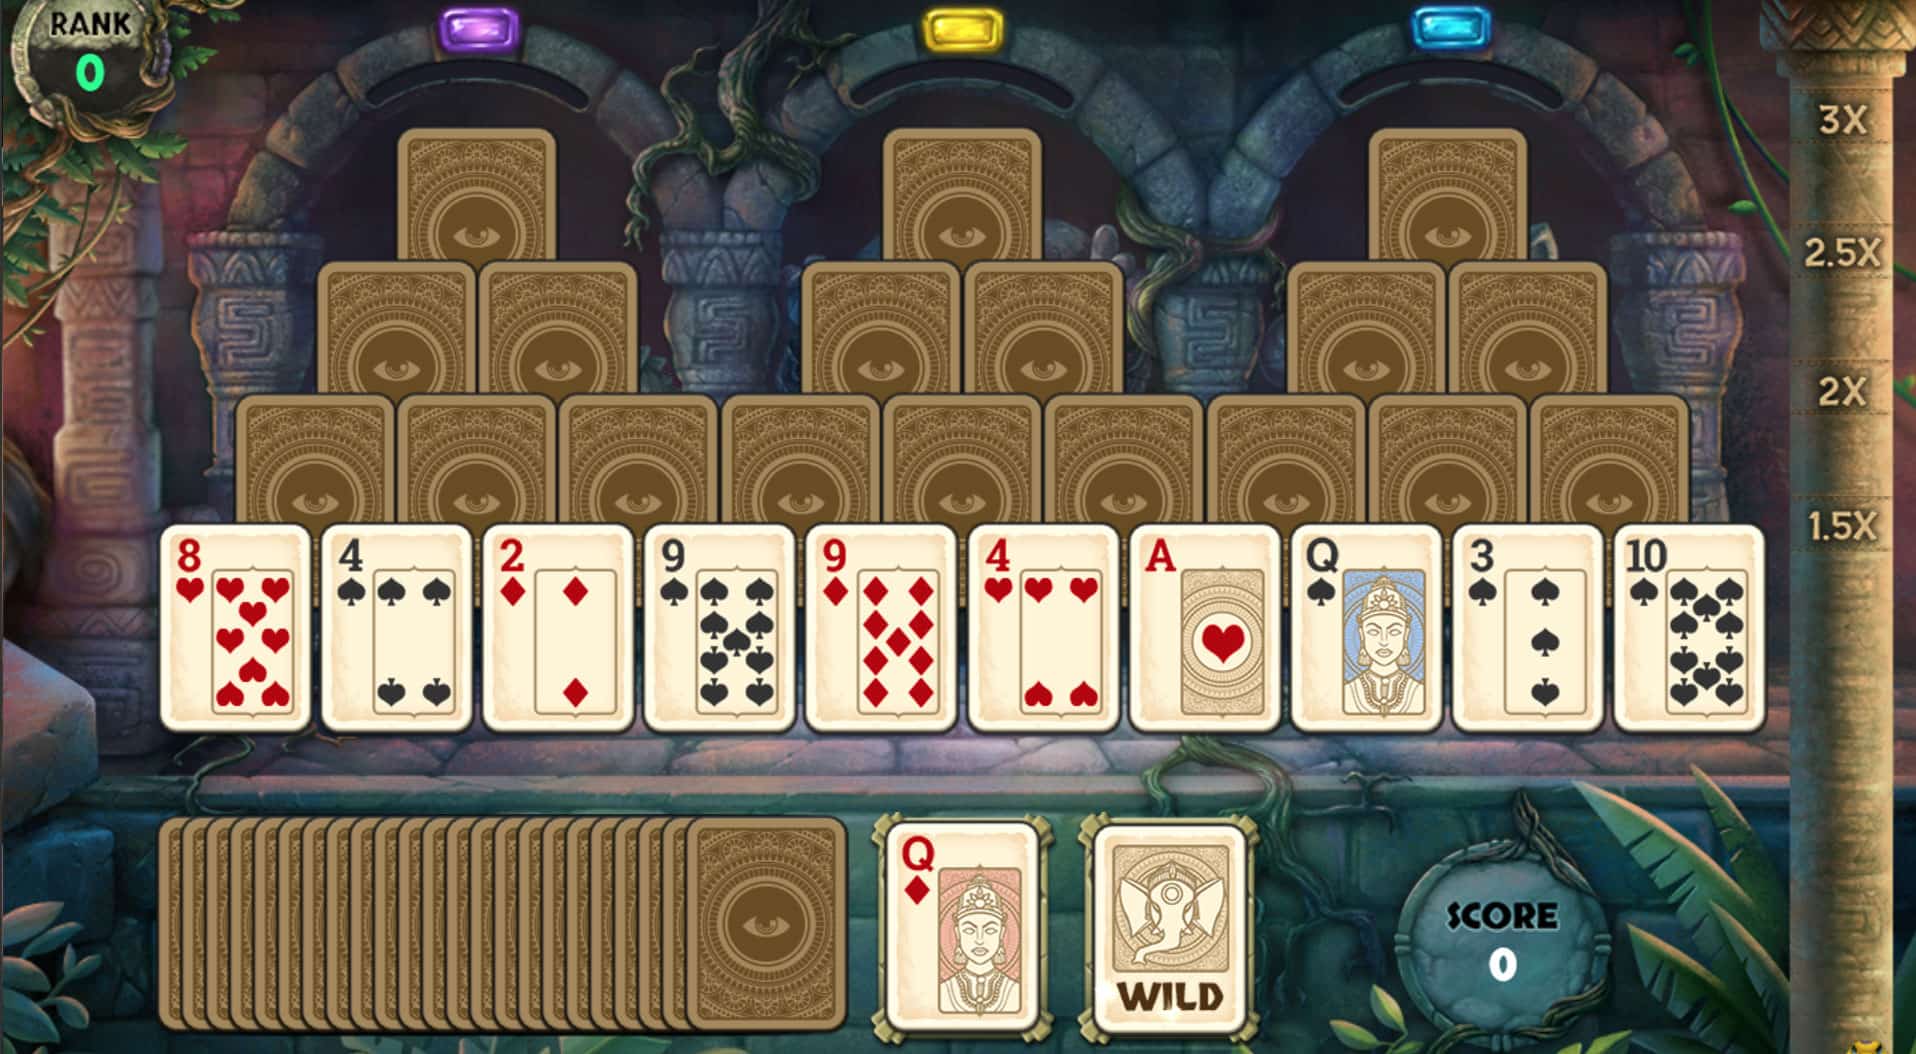 free coins and wilds for solitaire tripeaks